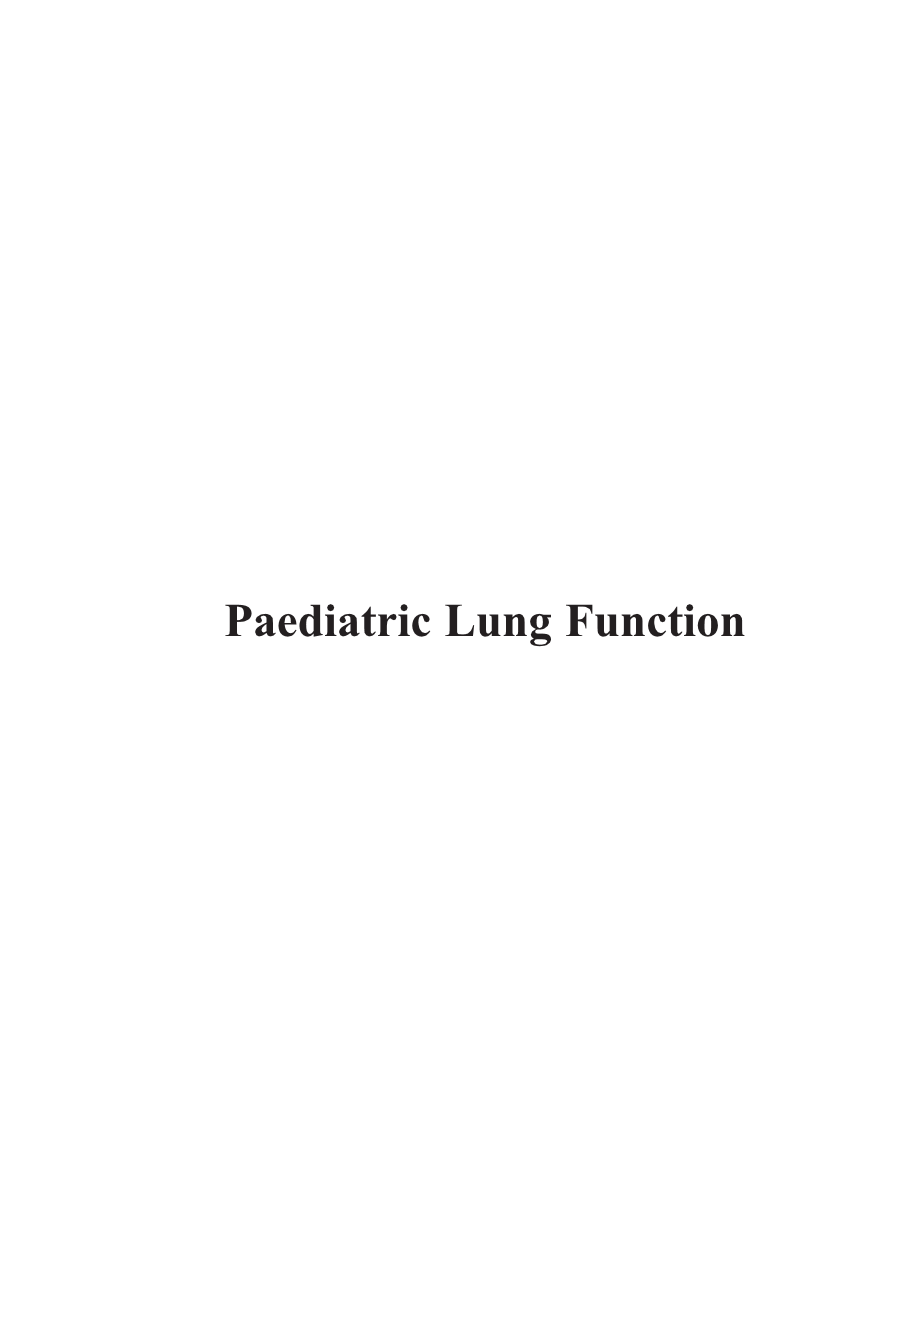 Paediatric Lung Function page ii